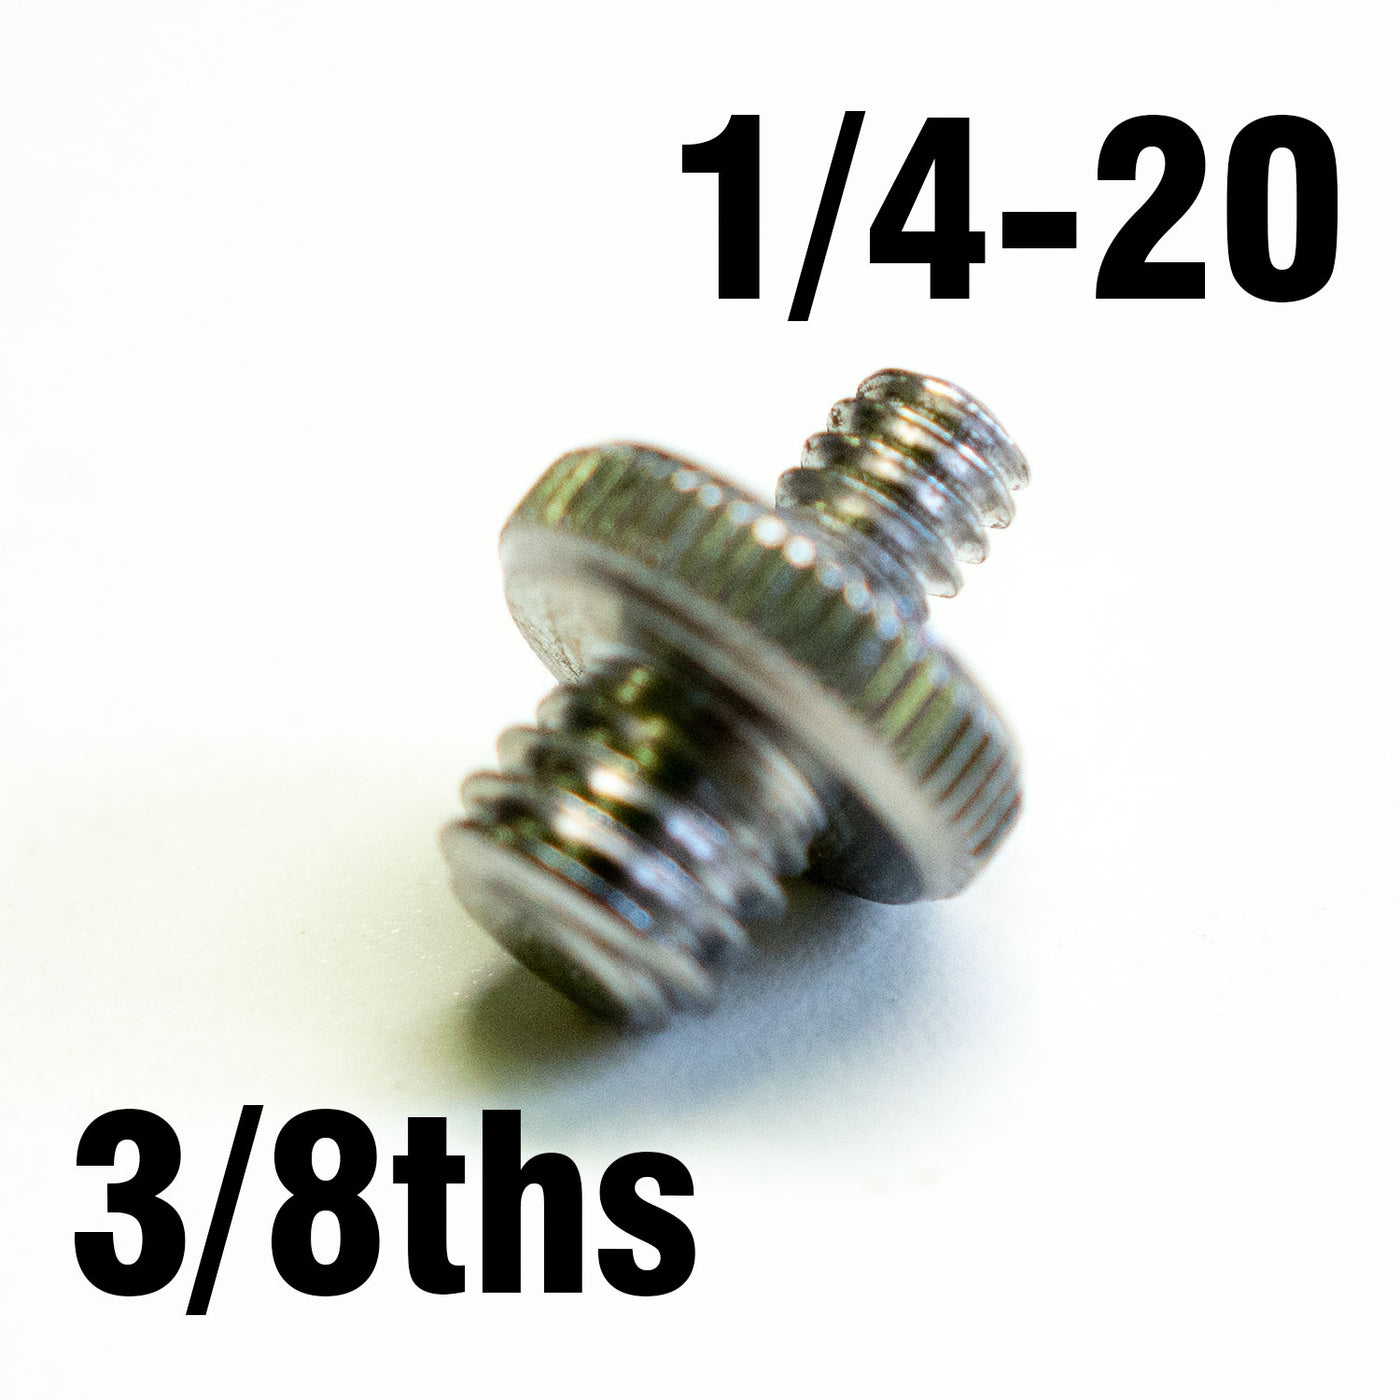 Male to Male 3/8ths to 1/4-20 adaptor - Sellout! - ScottyMakesStuff